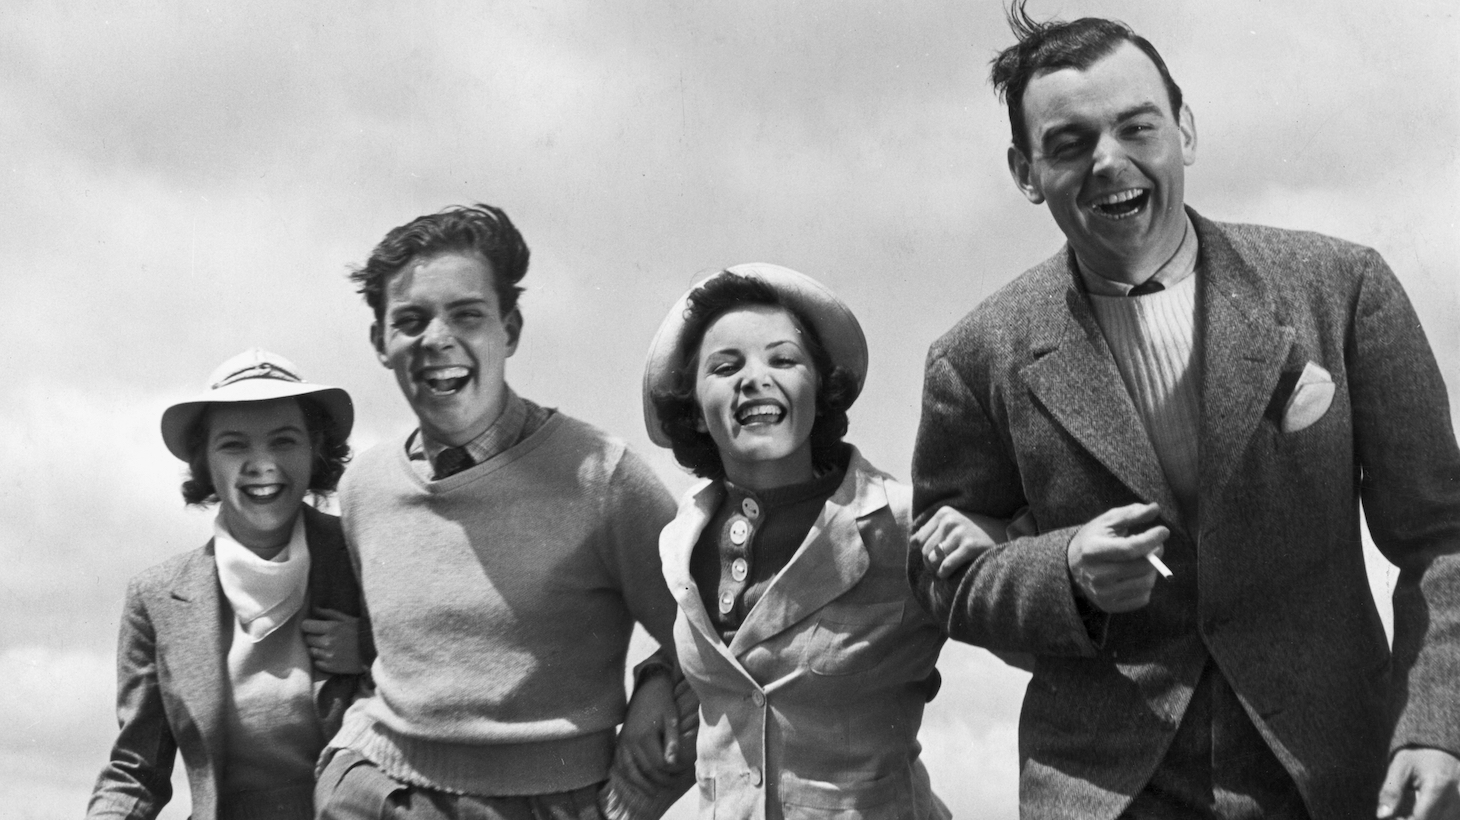 circa 1945: Two couples walk arm-in-arm outdoors, laughing. The wind blows the ladies' hats and the men's hair. (Photo by Hulton Archive/Getty Images)